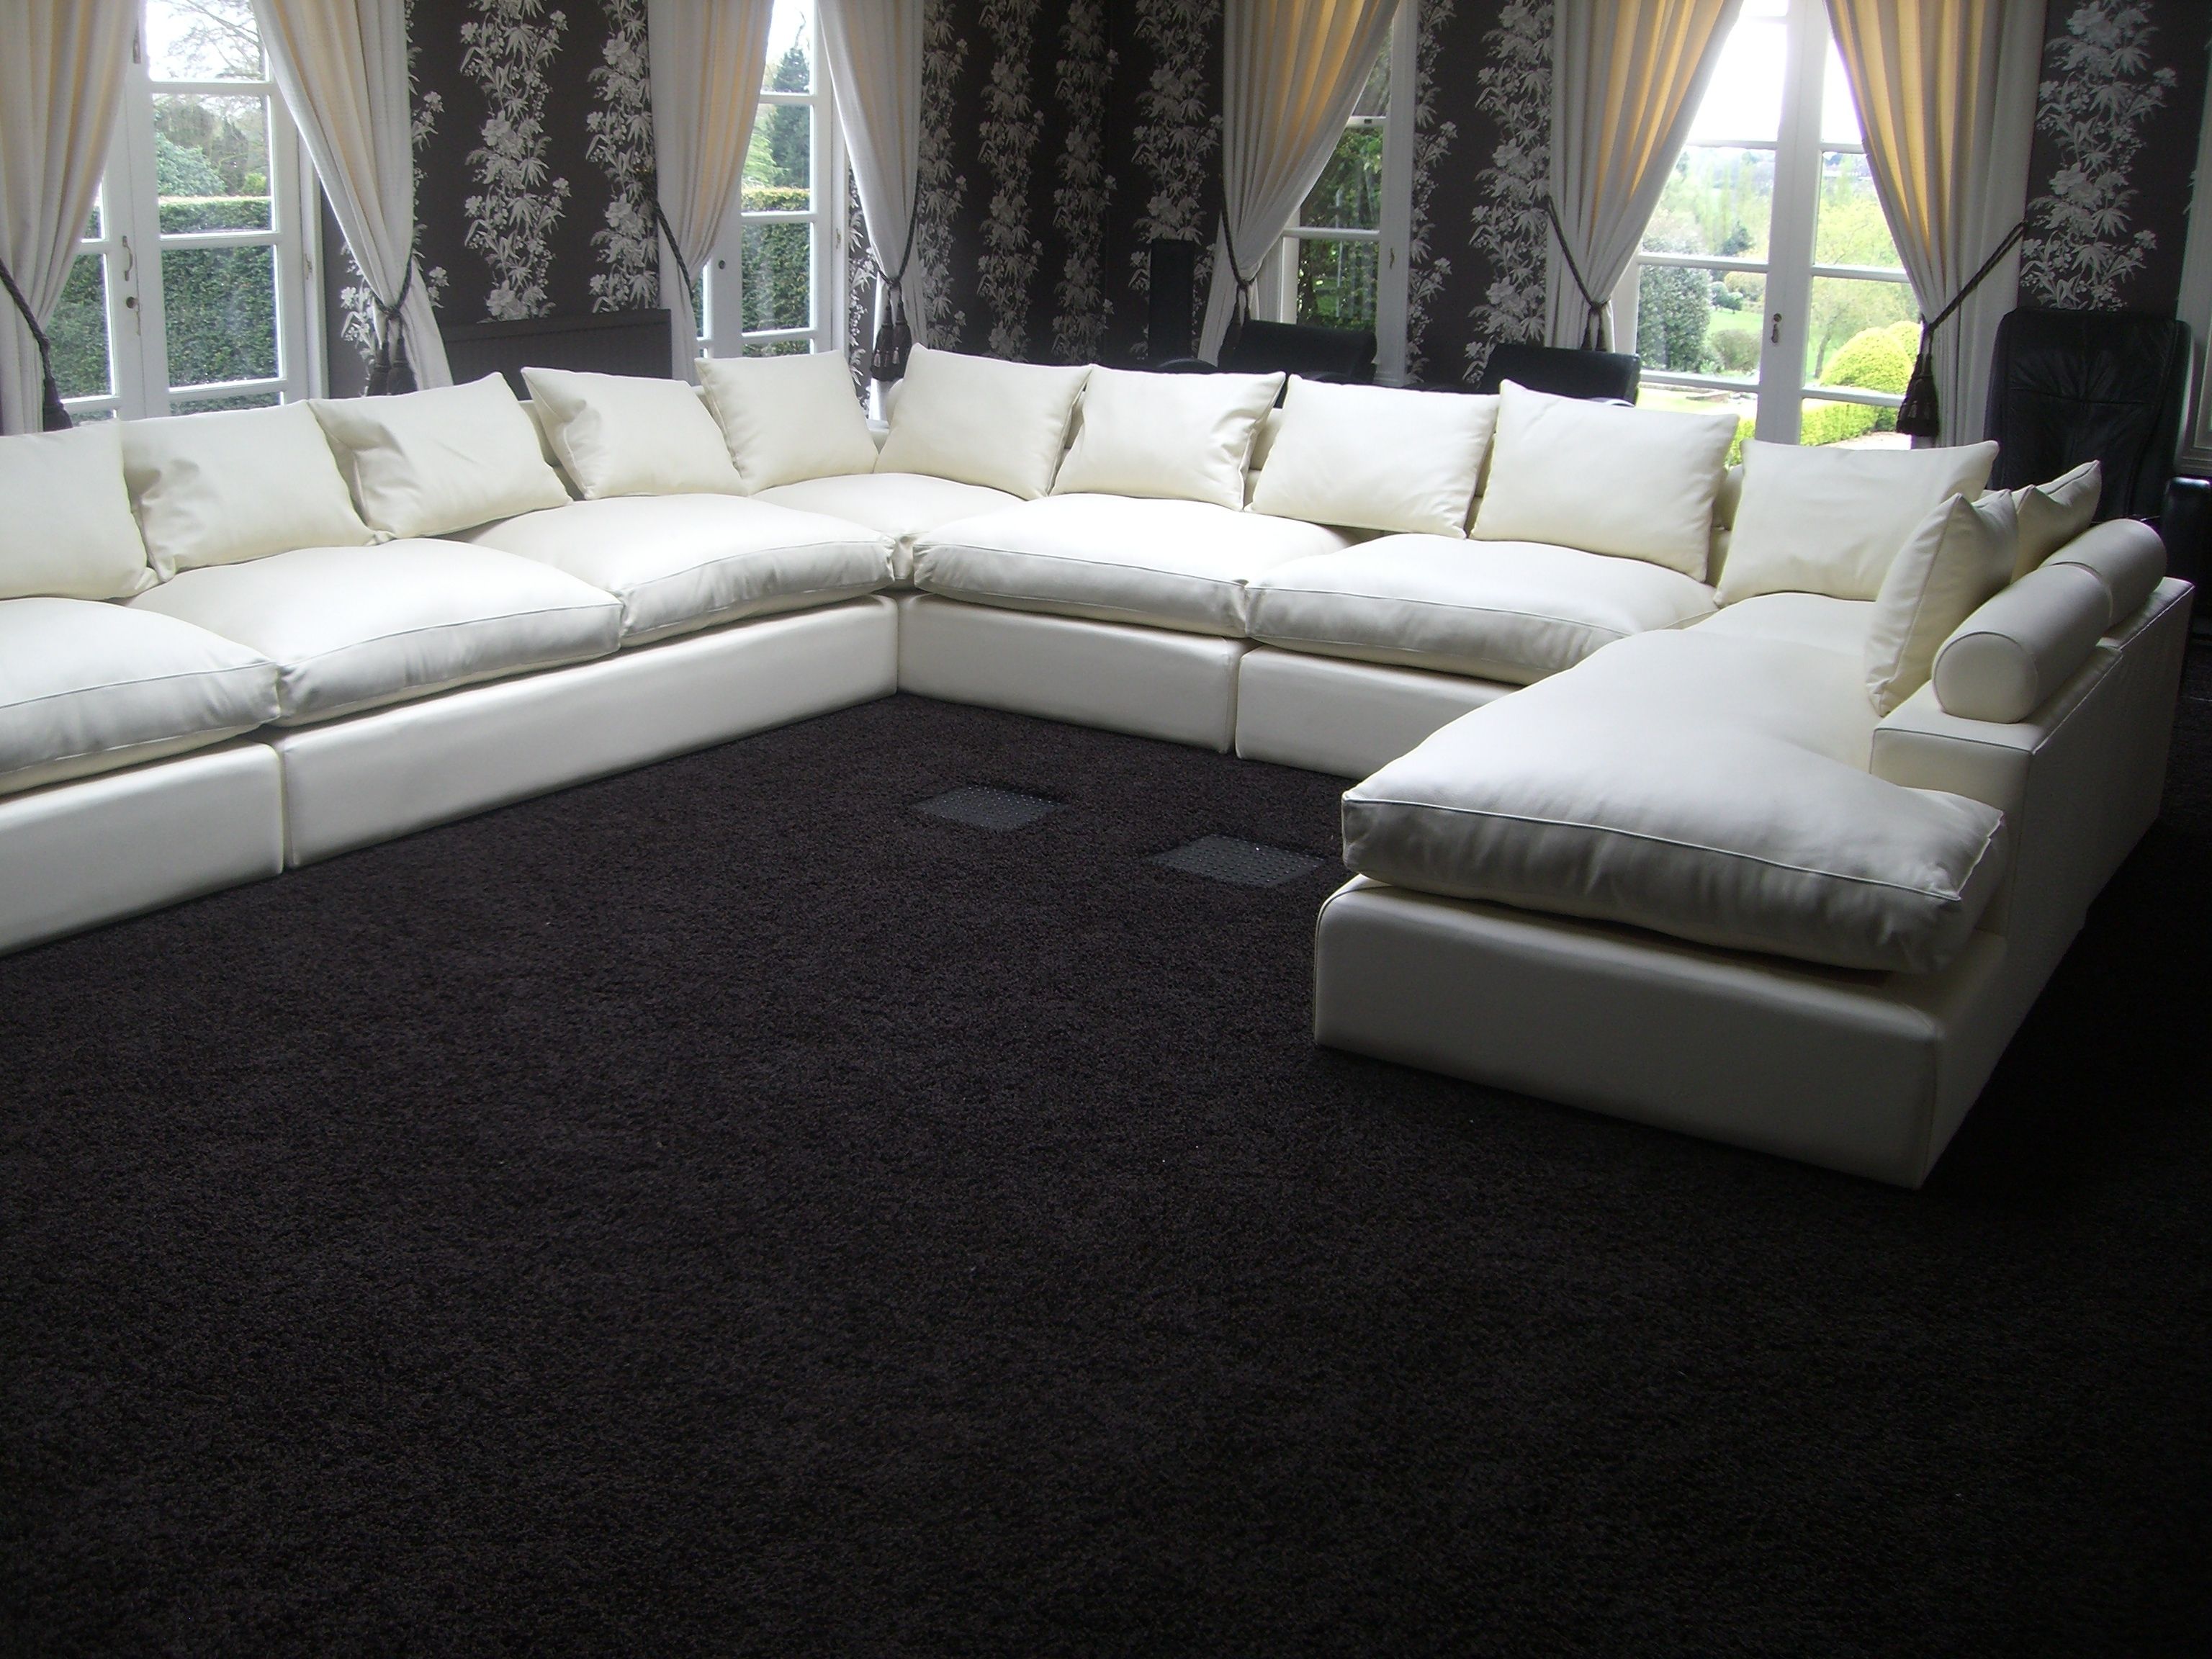 Sofa : Extra Large Sectionals For Sale U Shaped Sectional Sleeper In Large U Shaped Sectionals (View 2 of 15)